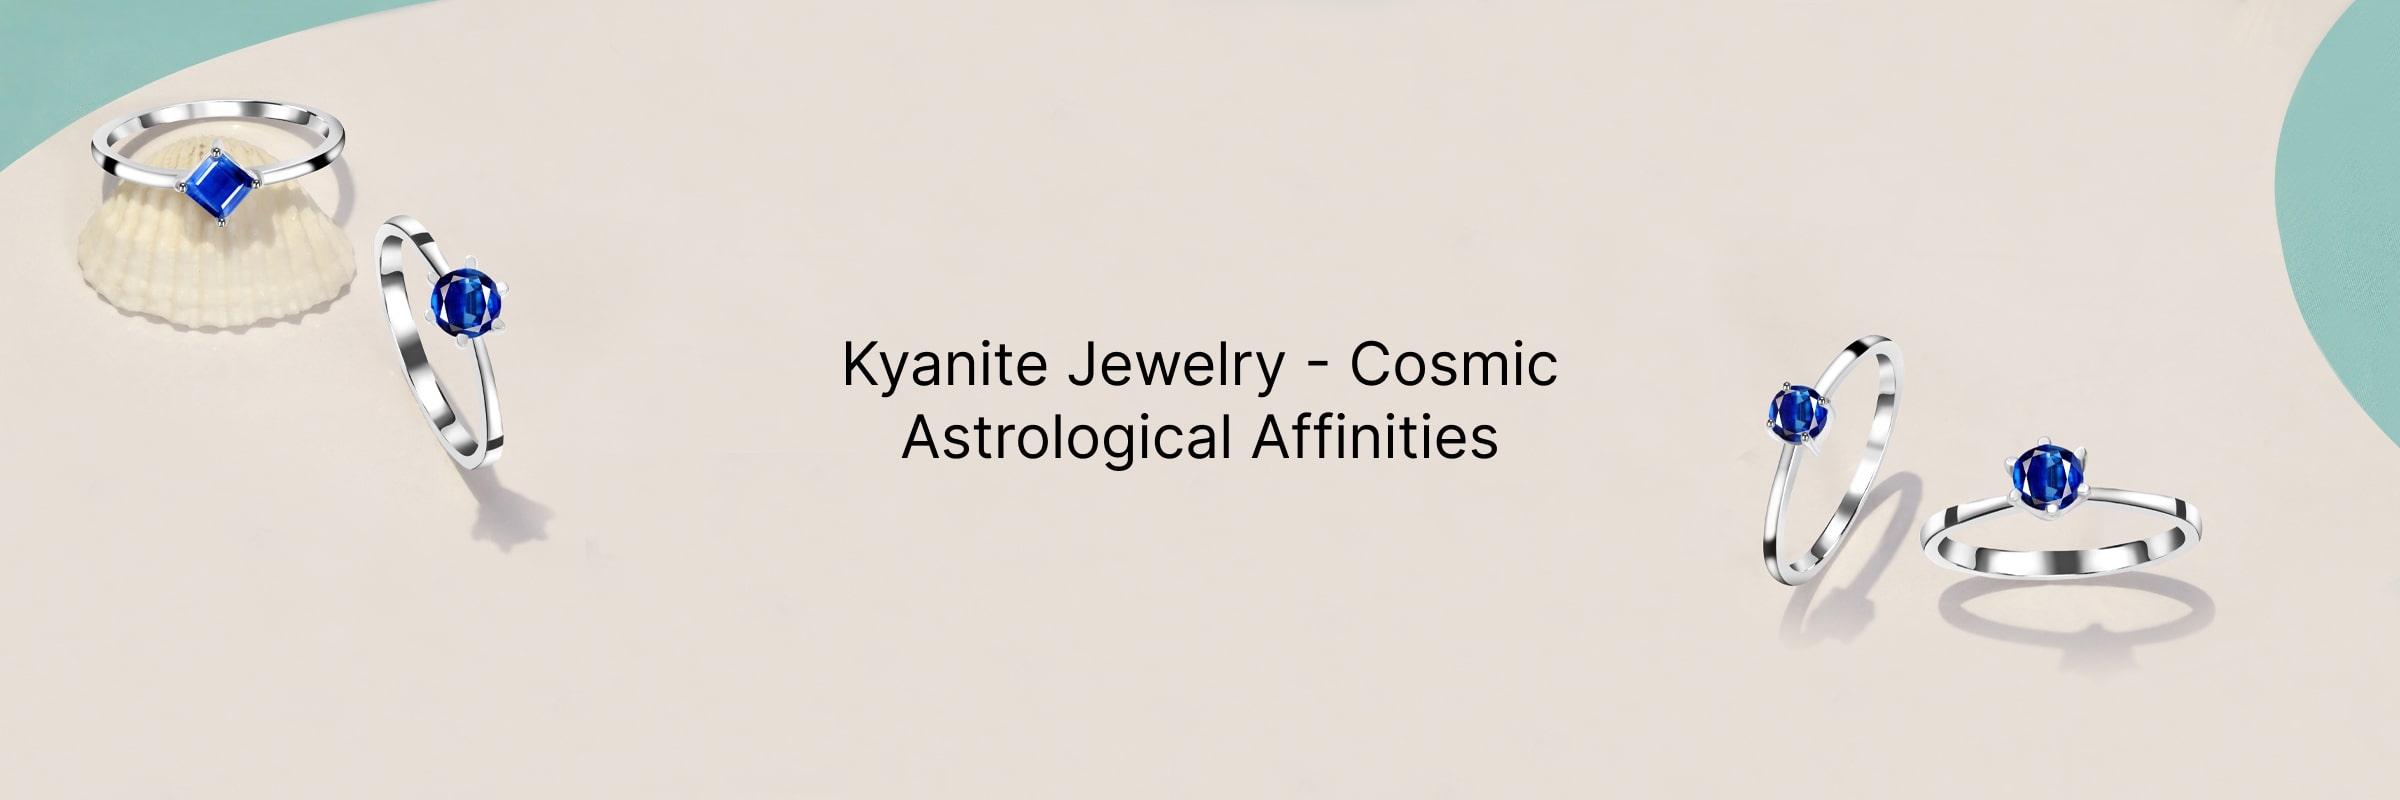 Consortium of Kyanite Jewelry with Astrology